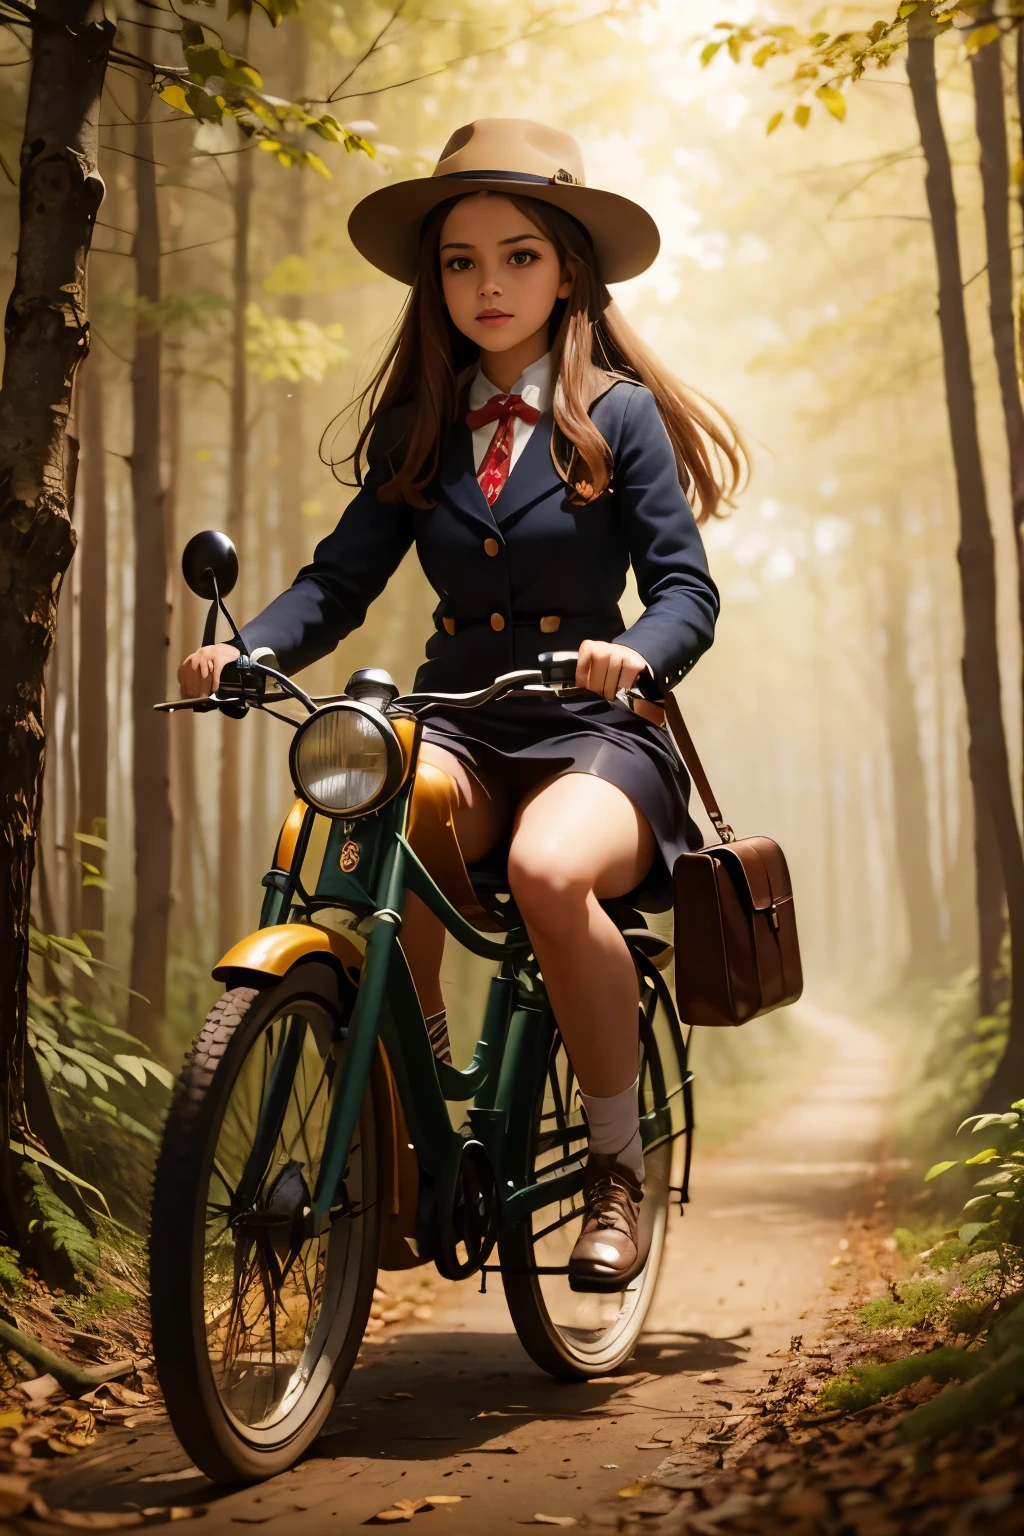 Neo Surrealism, magical realism bizarre art, pop surrealism, whimsical art. Generate an illustration of a painting of a girl with hat riding an old fashioned bicycle on the magic forest